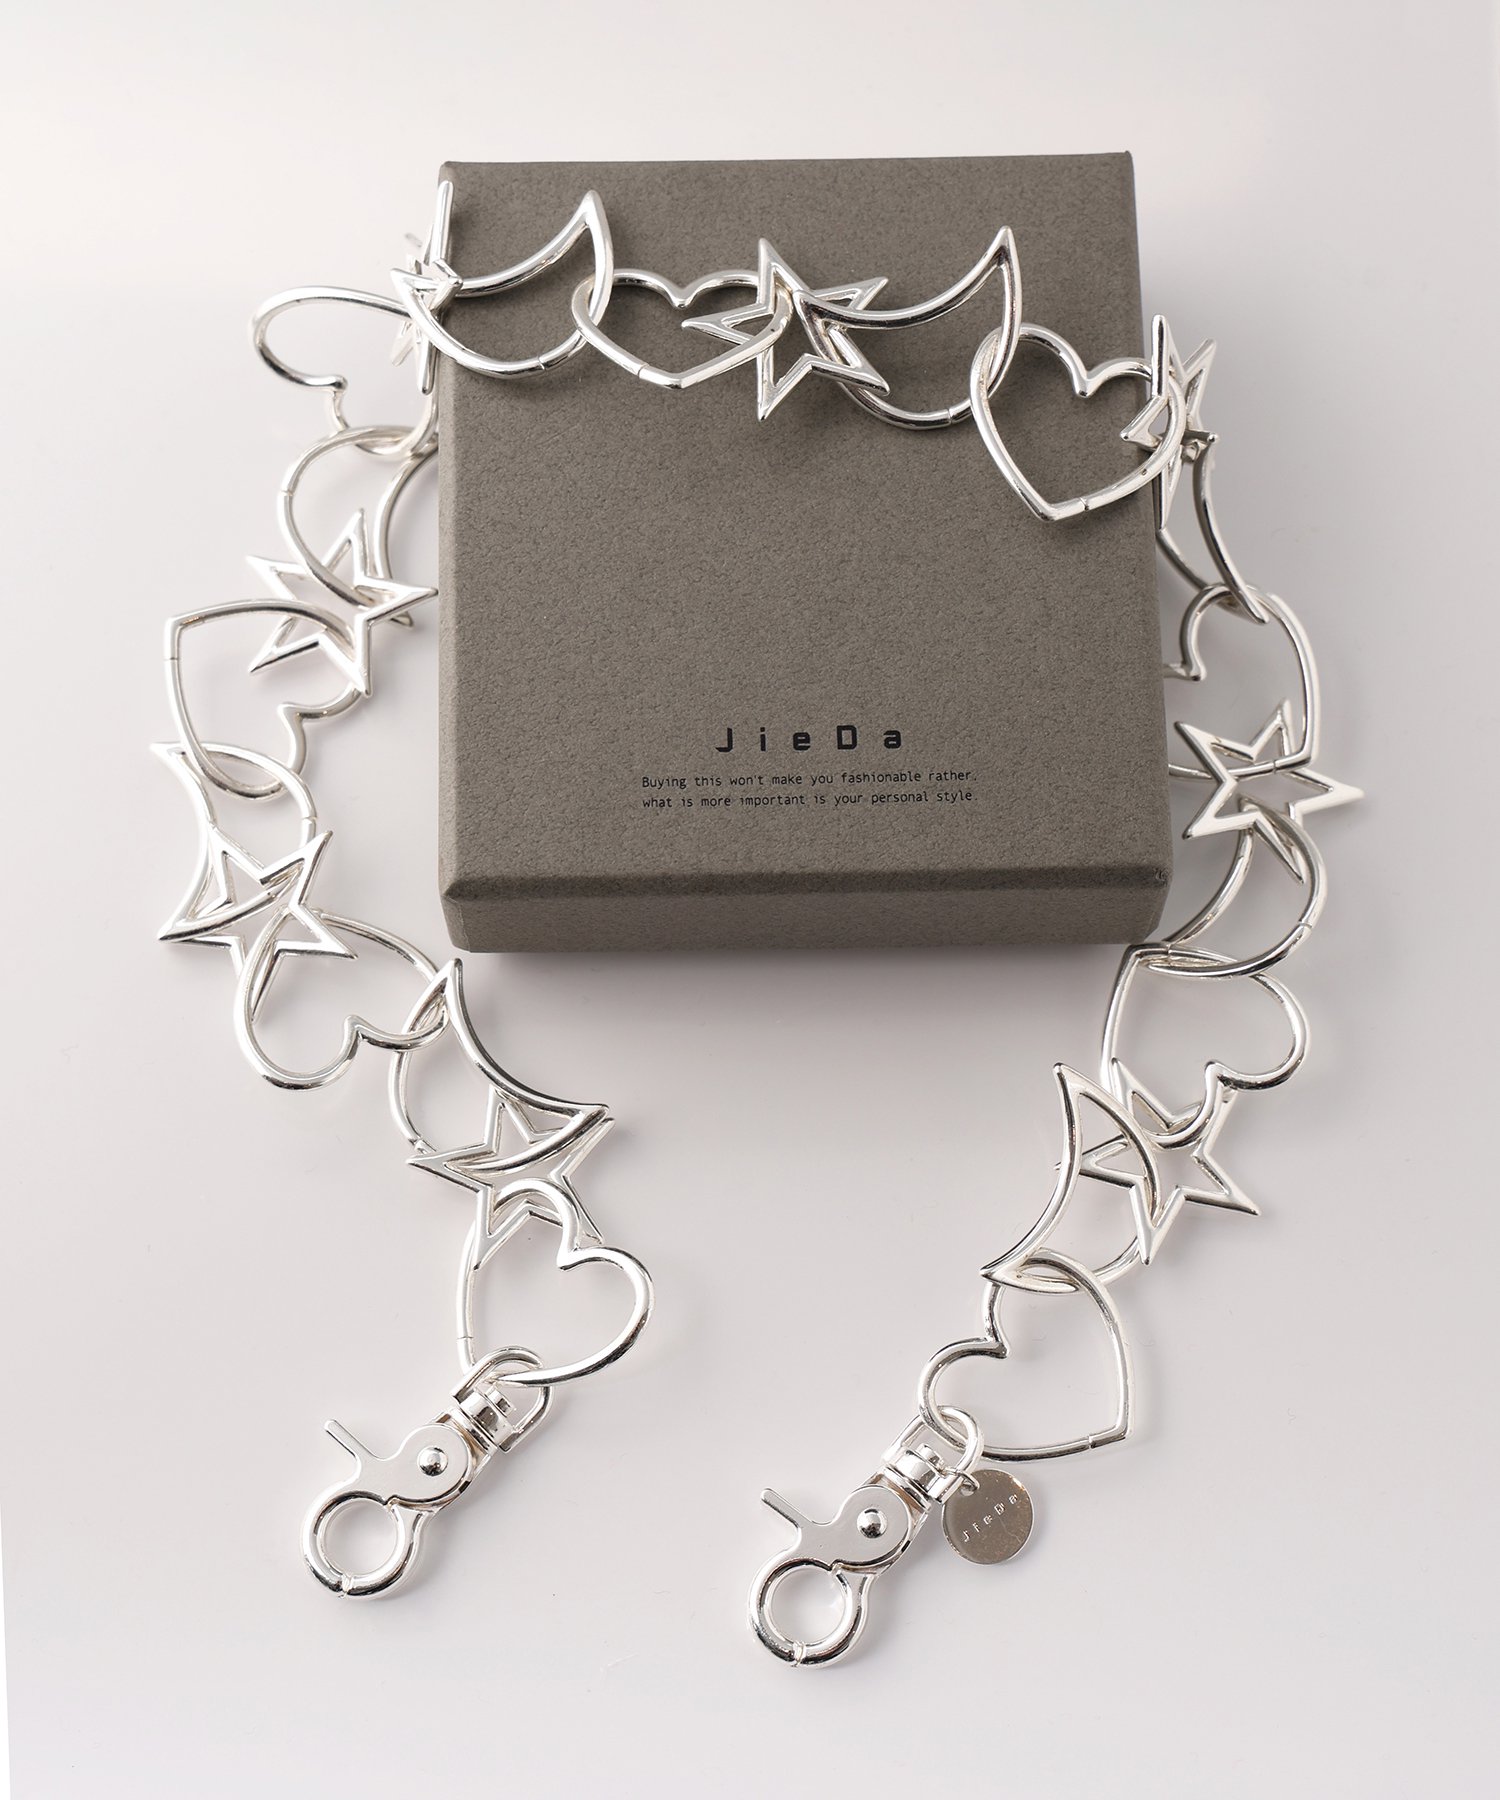 JieDa<br />2WAY STAR MOON HEART CHAIN / SILVER<img class='new_mark_img2' src='https://img.shop-pro.jp/img/new/icons47.gif' style='border:none;display:inline;margin:0px;padding:0px;width:auto;' />